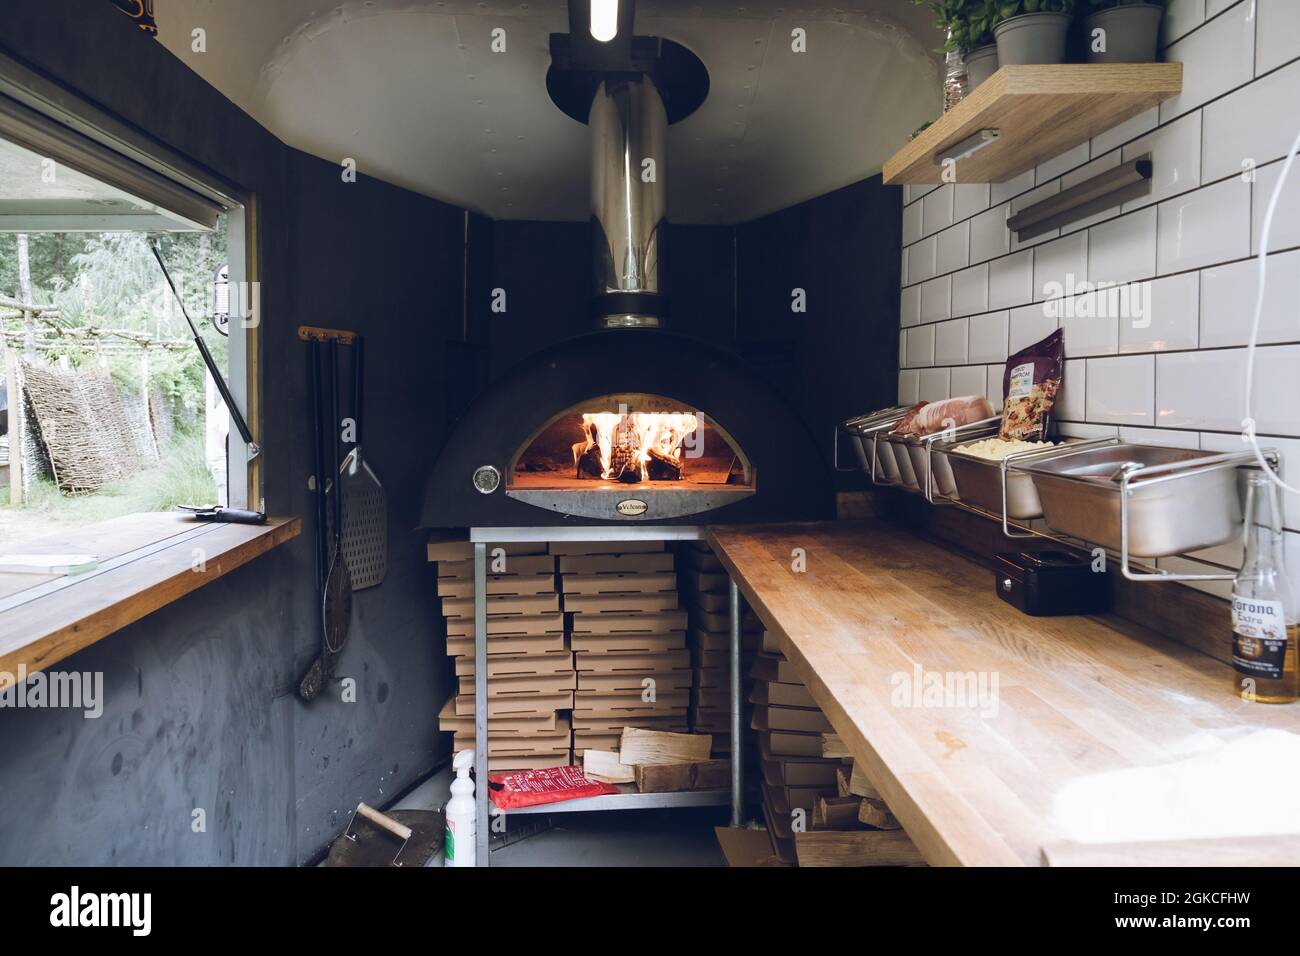 a mobile kitchen with a pizza oven burning inside Stock Photo